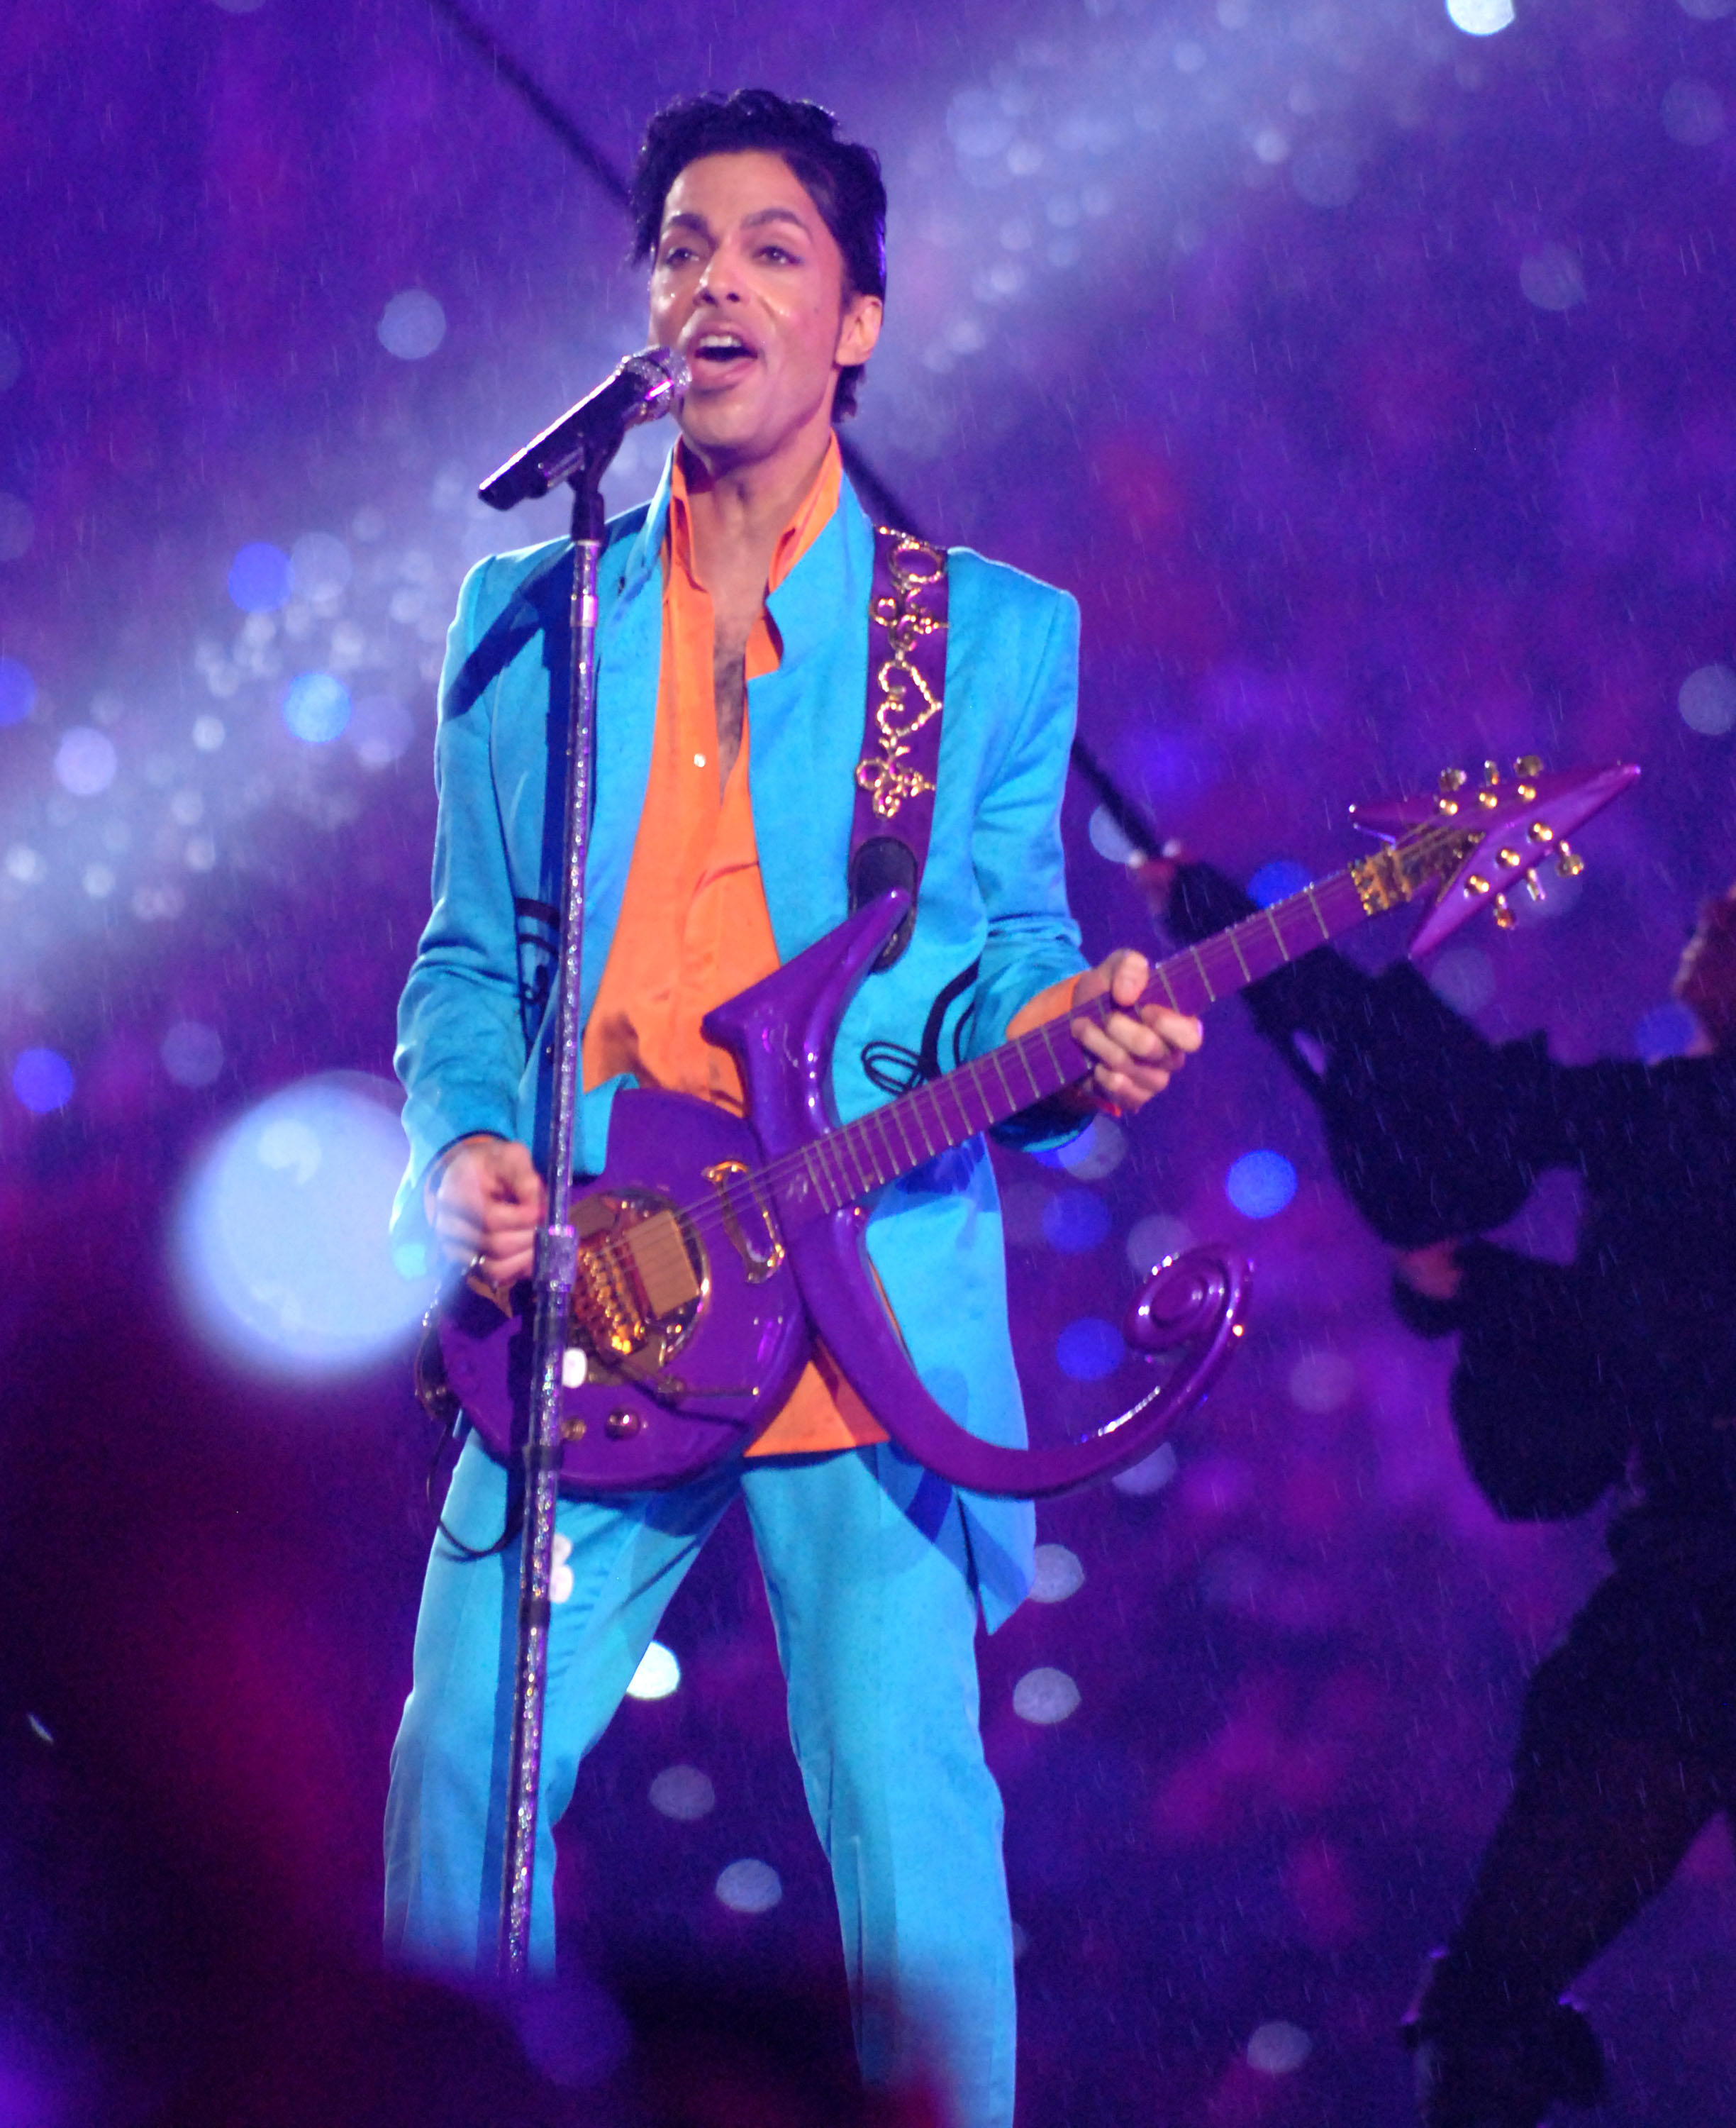 prince singing and playing guitar on stage